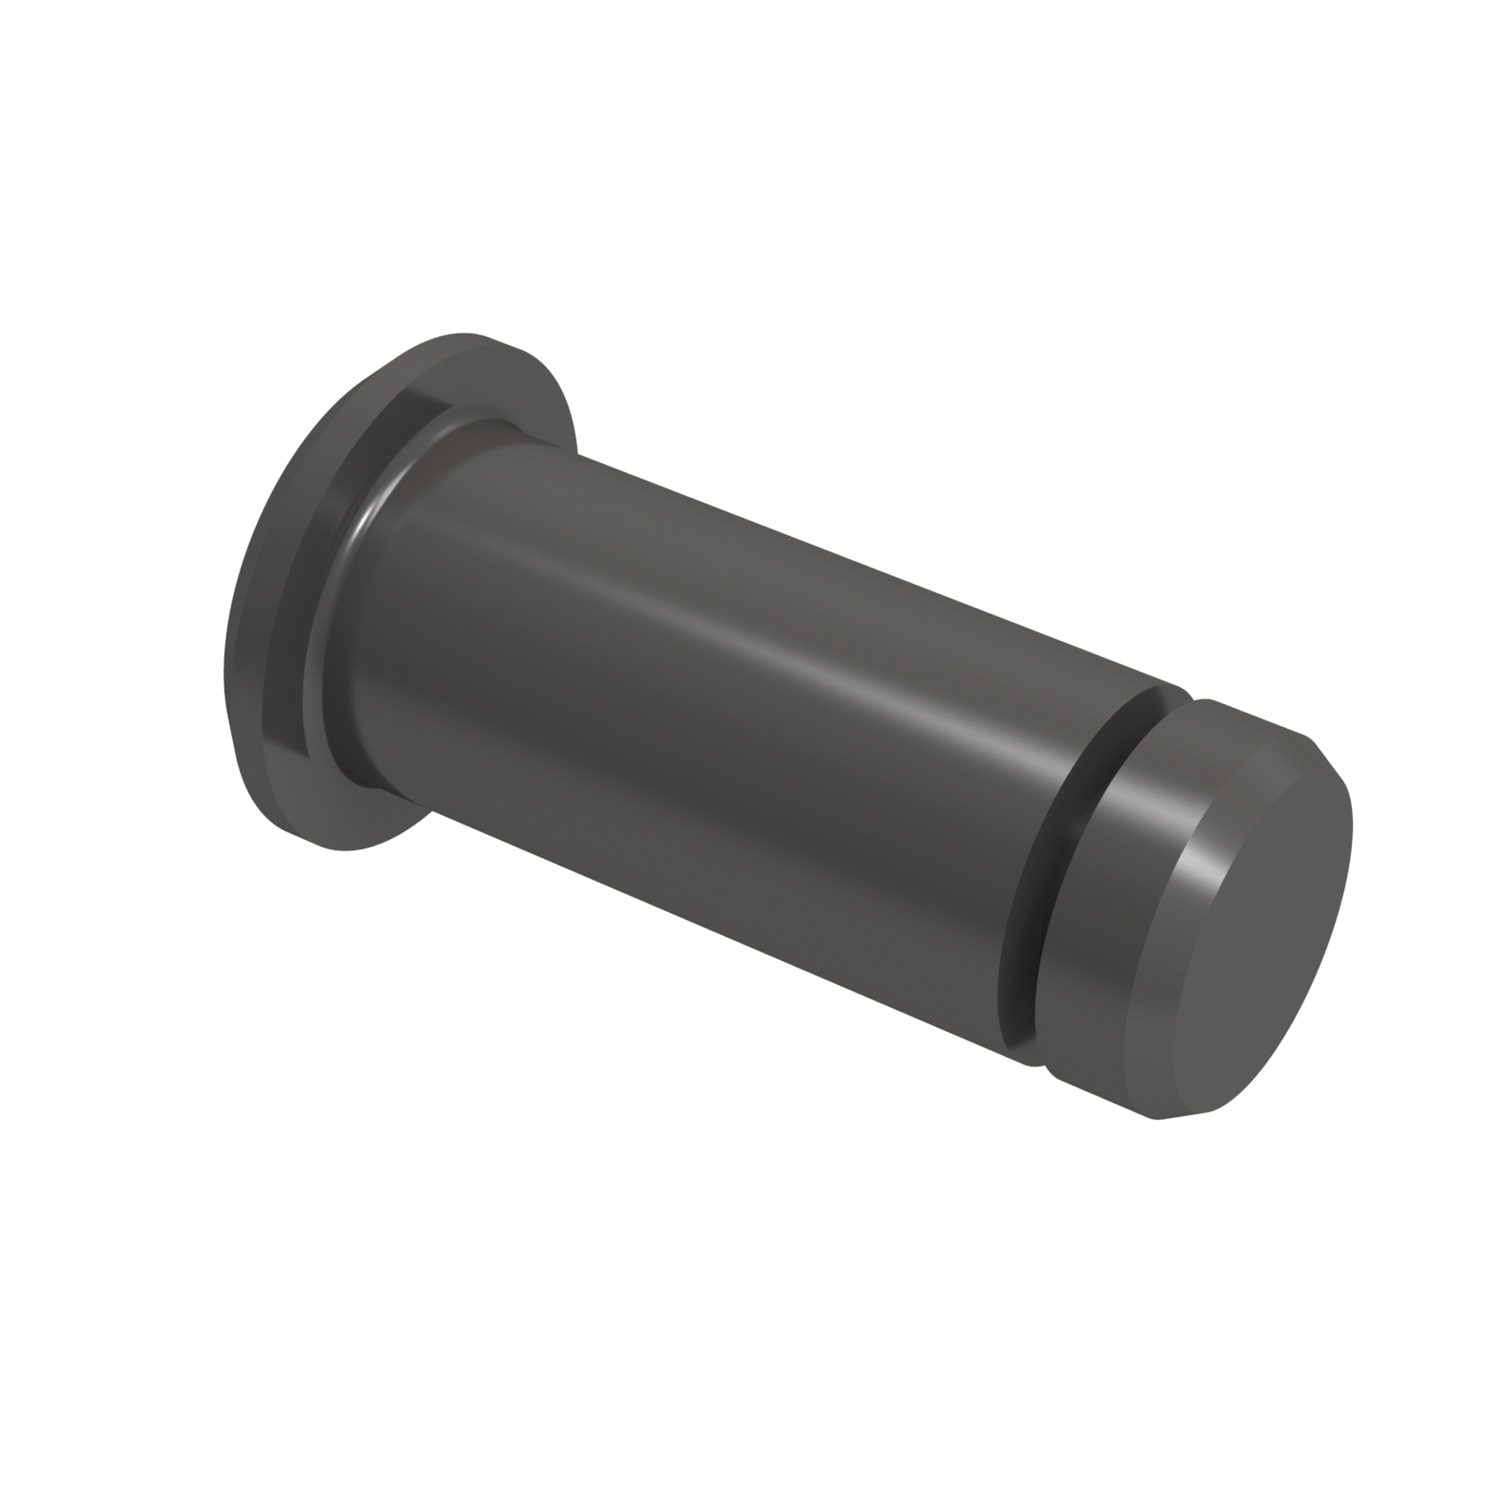 R3453 Plastic Clevis Pin